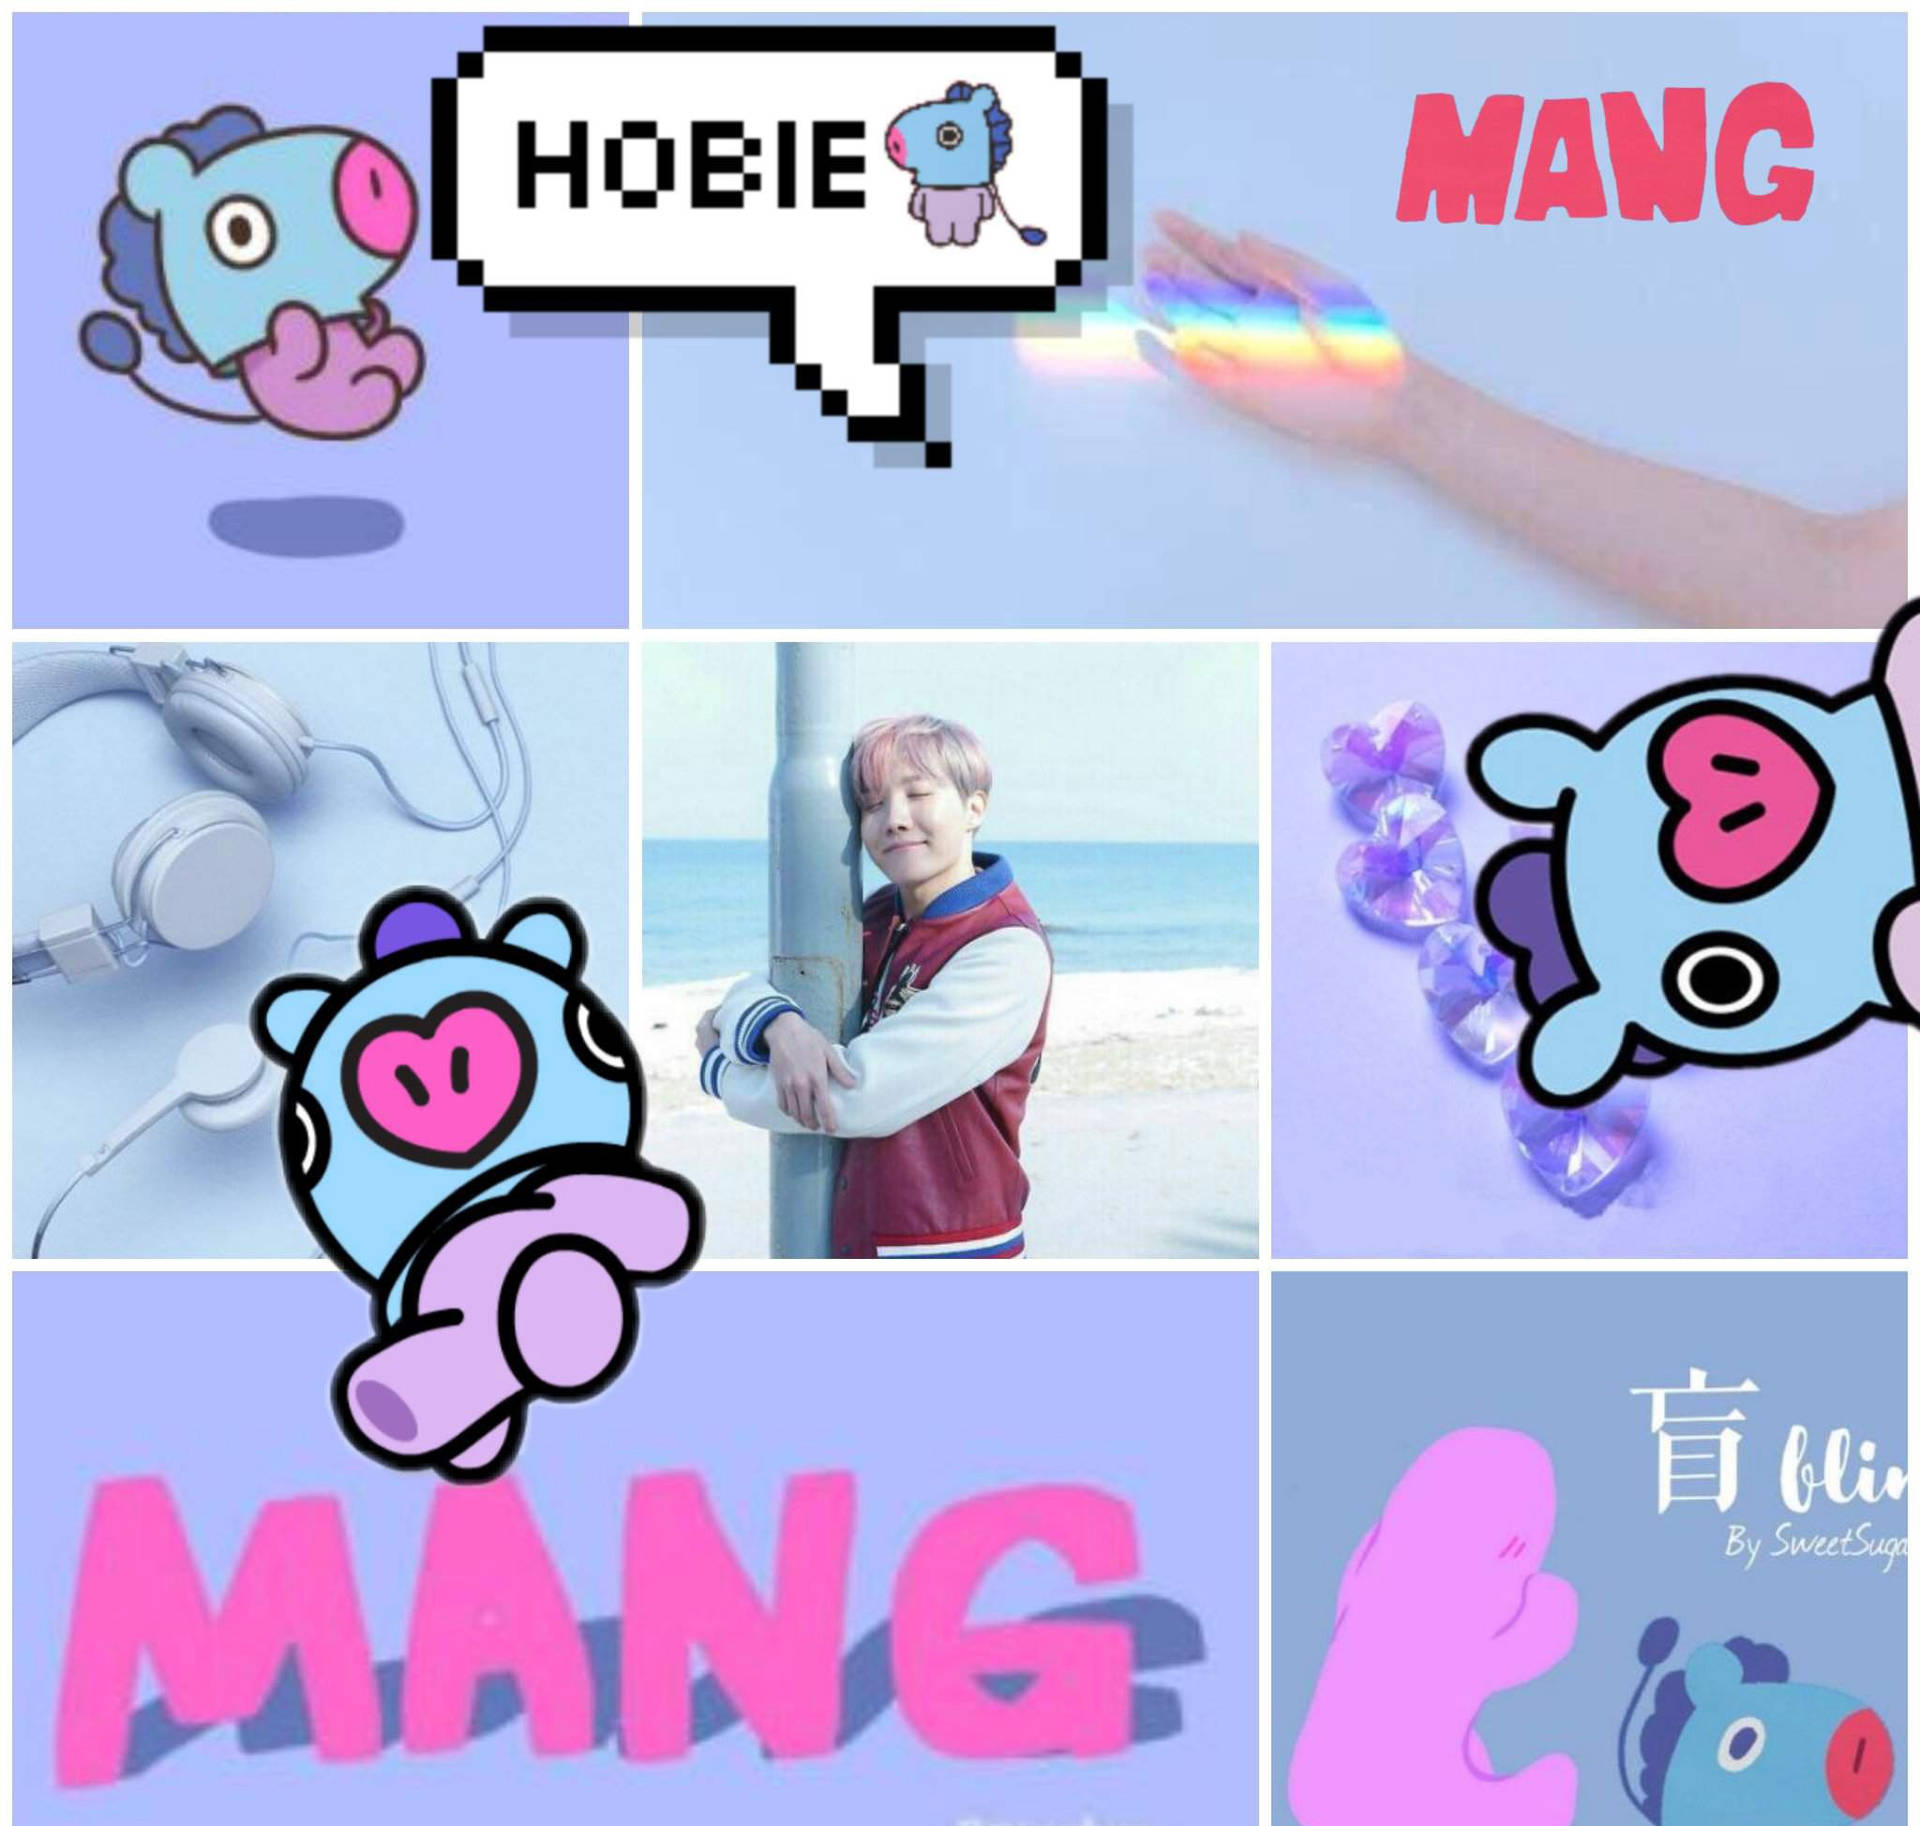 Hang Out With The Ever-adorable Mang Bt21 In This Bright And Playful Desktop Wallpaper.